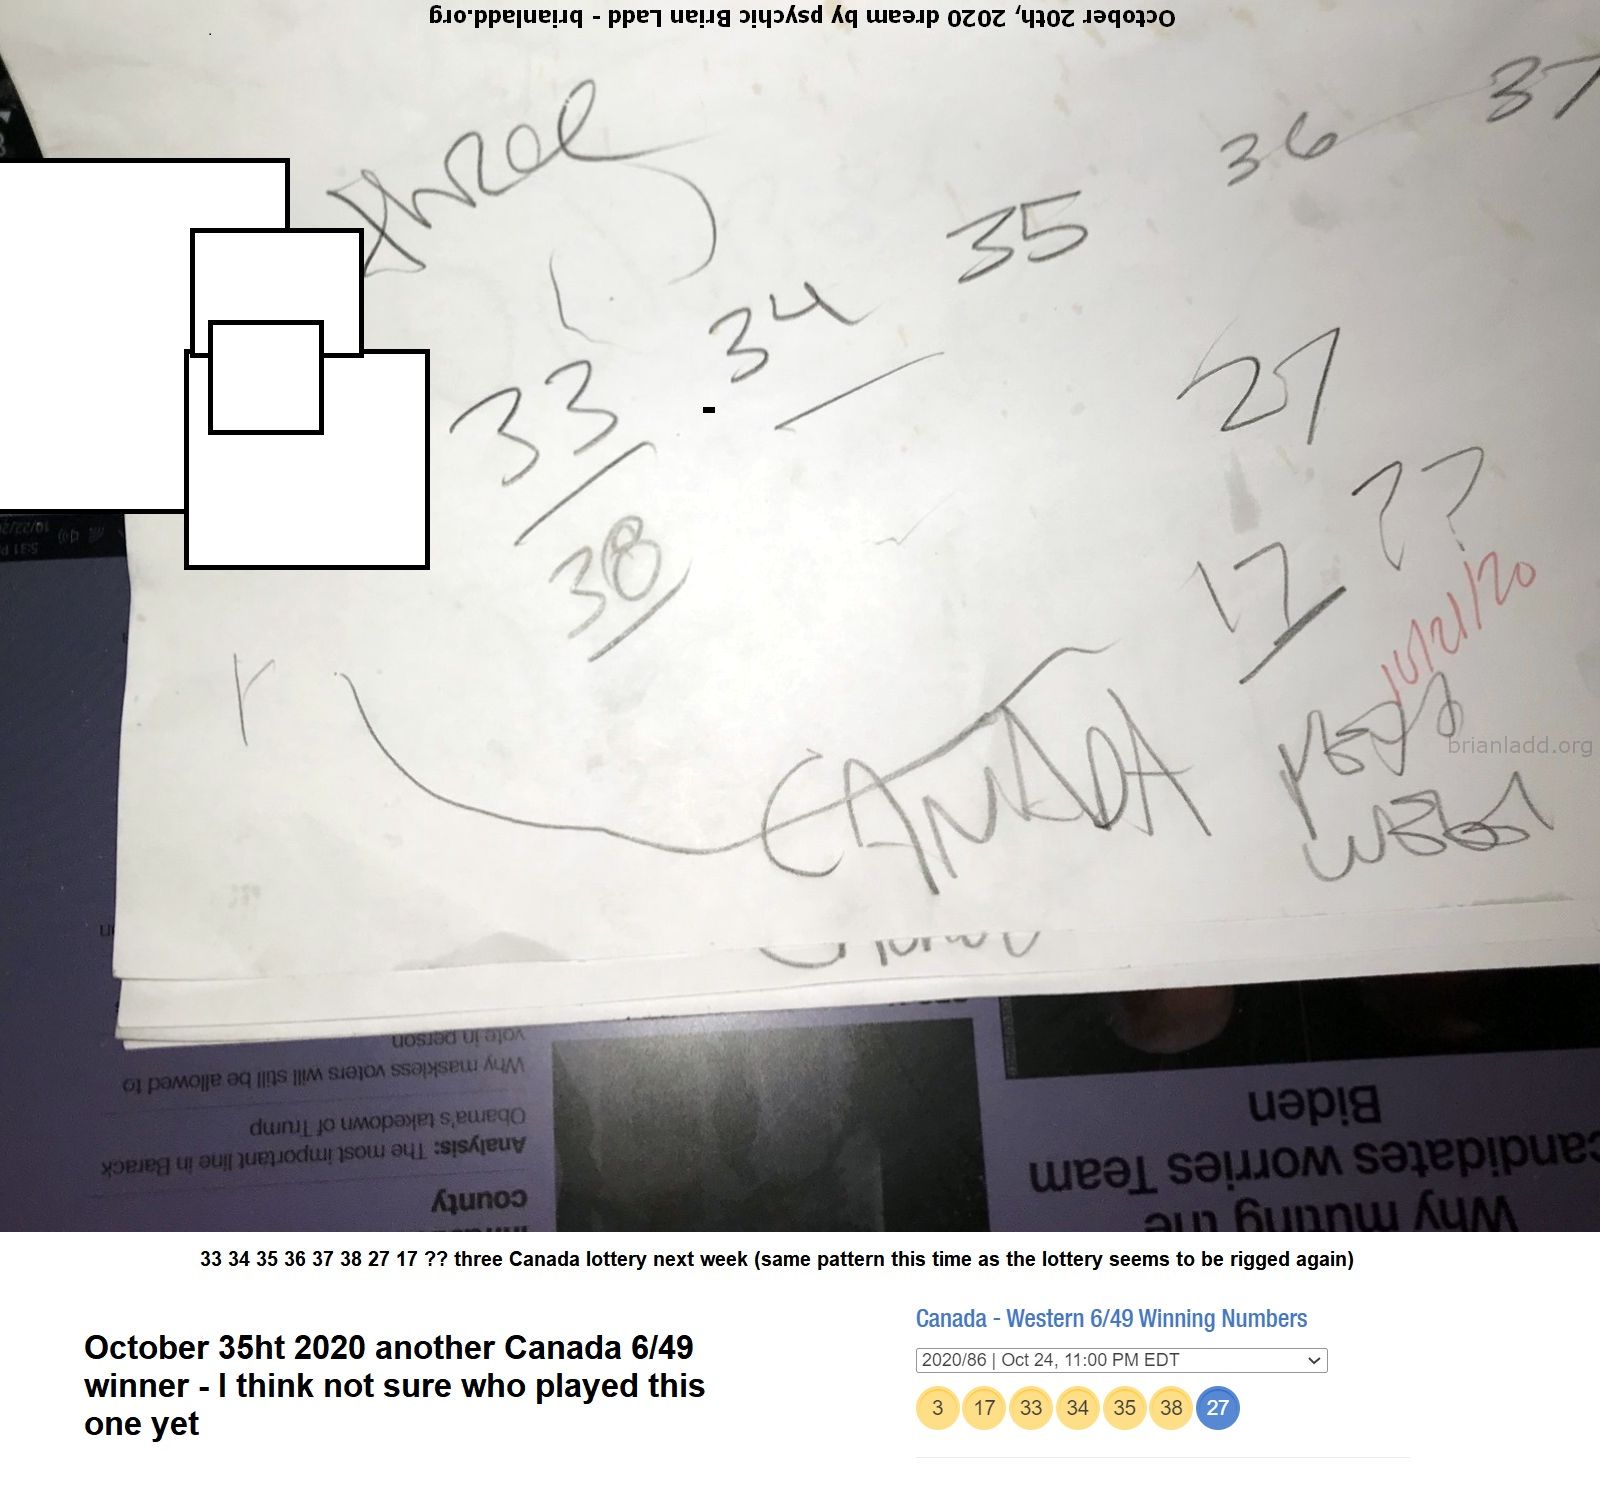 October 25Th 2020 Another Canada 6 49 Winner I Think Not Sure Who Played This One Yet - October 25th 2020 Another Canada...
October 25th 2020 Another Canada 6/49 Winner - I Think Not Sure Who Played This One Yet  Want Me To Pick Numbers For You ?  Visit   https://briansprediction.com/Win
